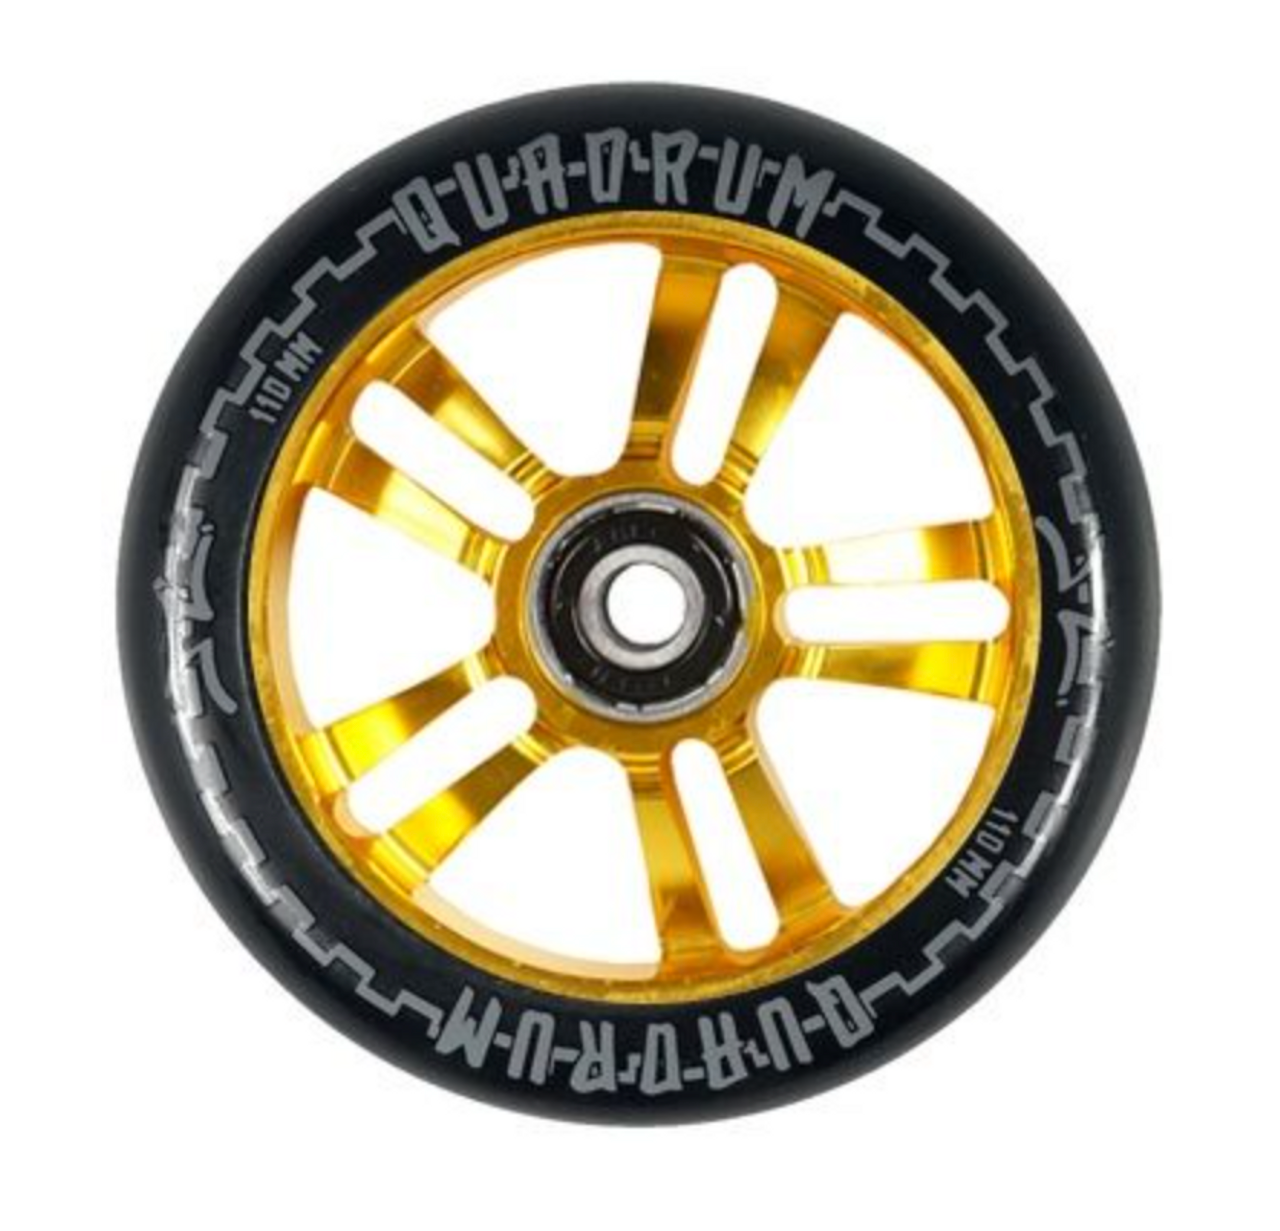 AO Pro Scooter Wheels 110mm - Gold (pair)